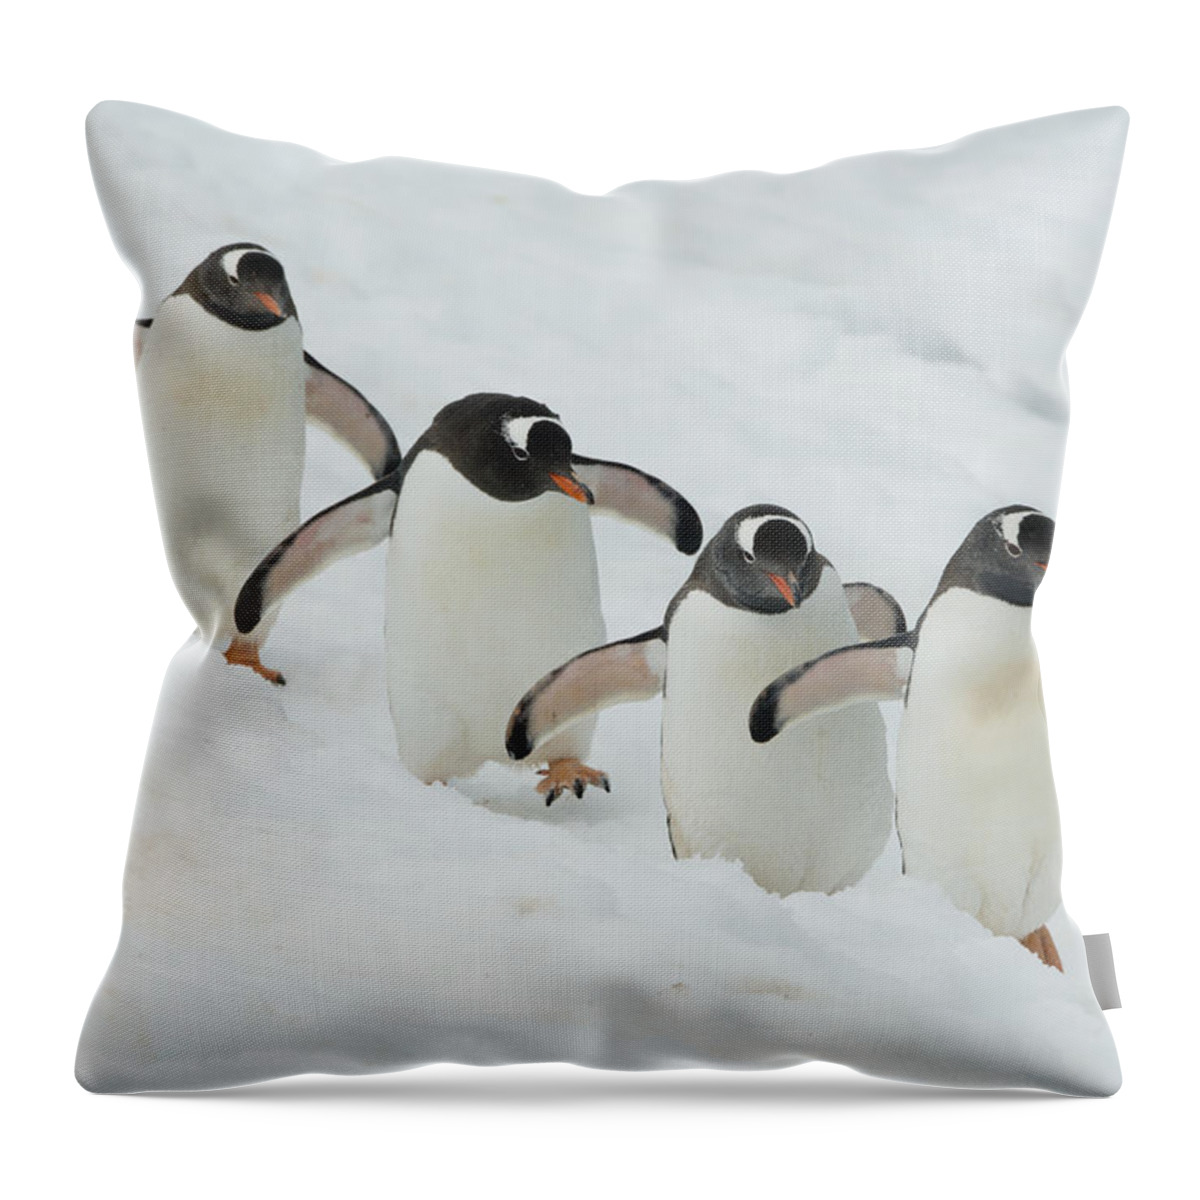 534754 Throw Pillow featuring the photograph Gentoo Penguin Quartet Booth Isl by Kevin Schafer